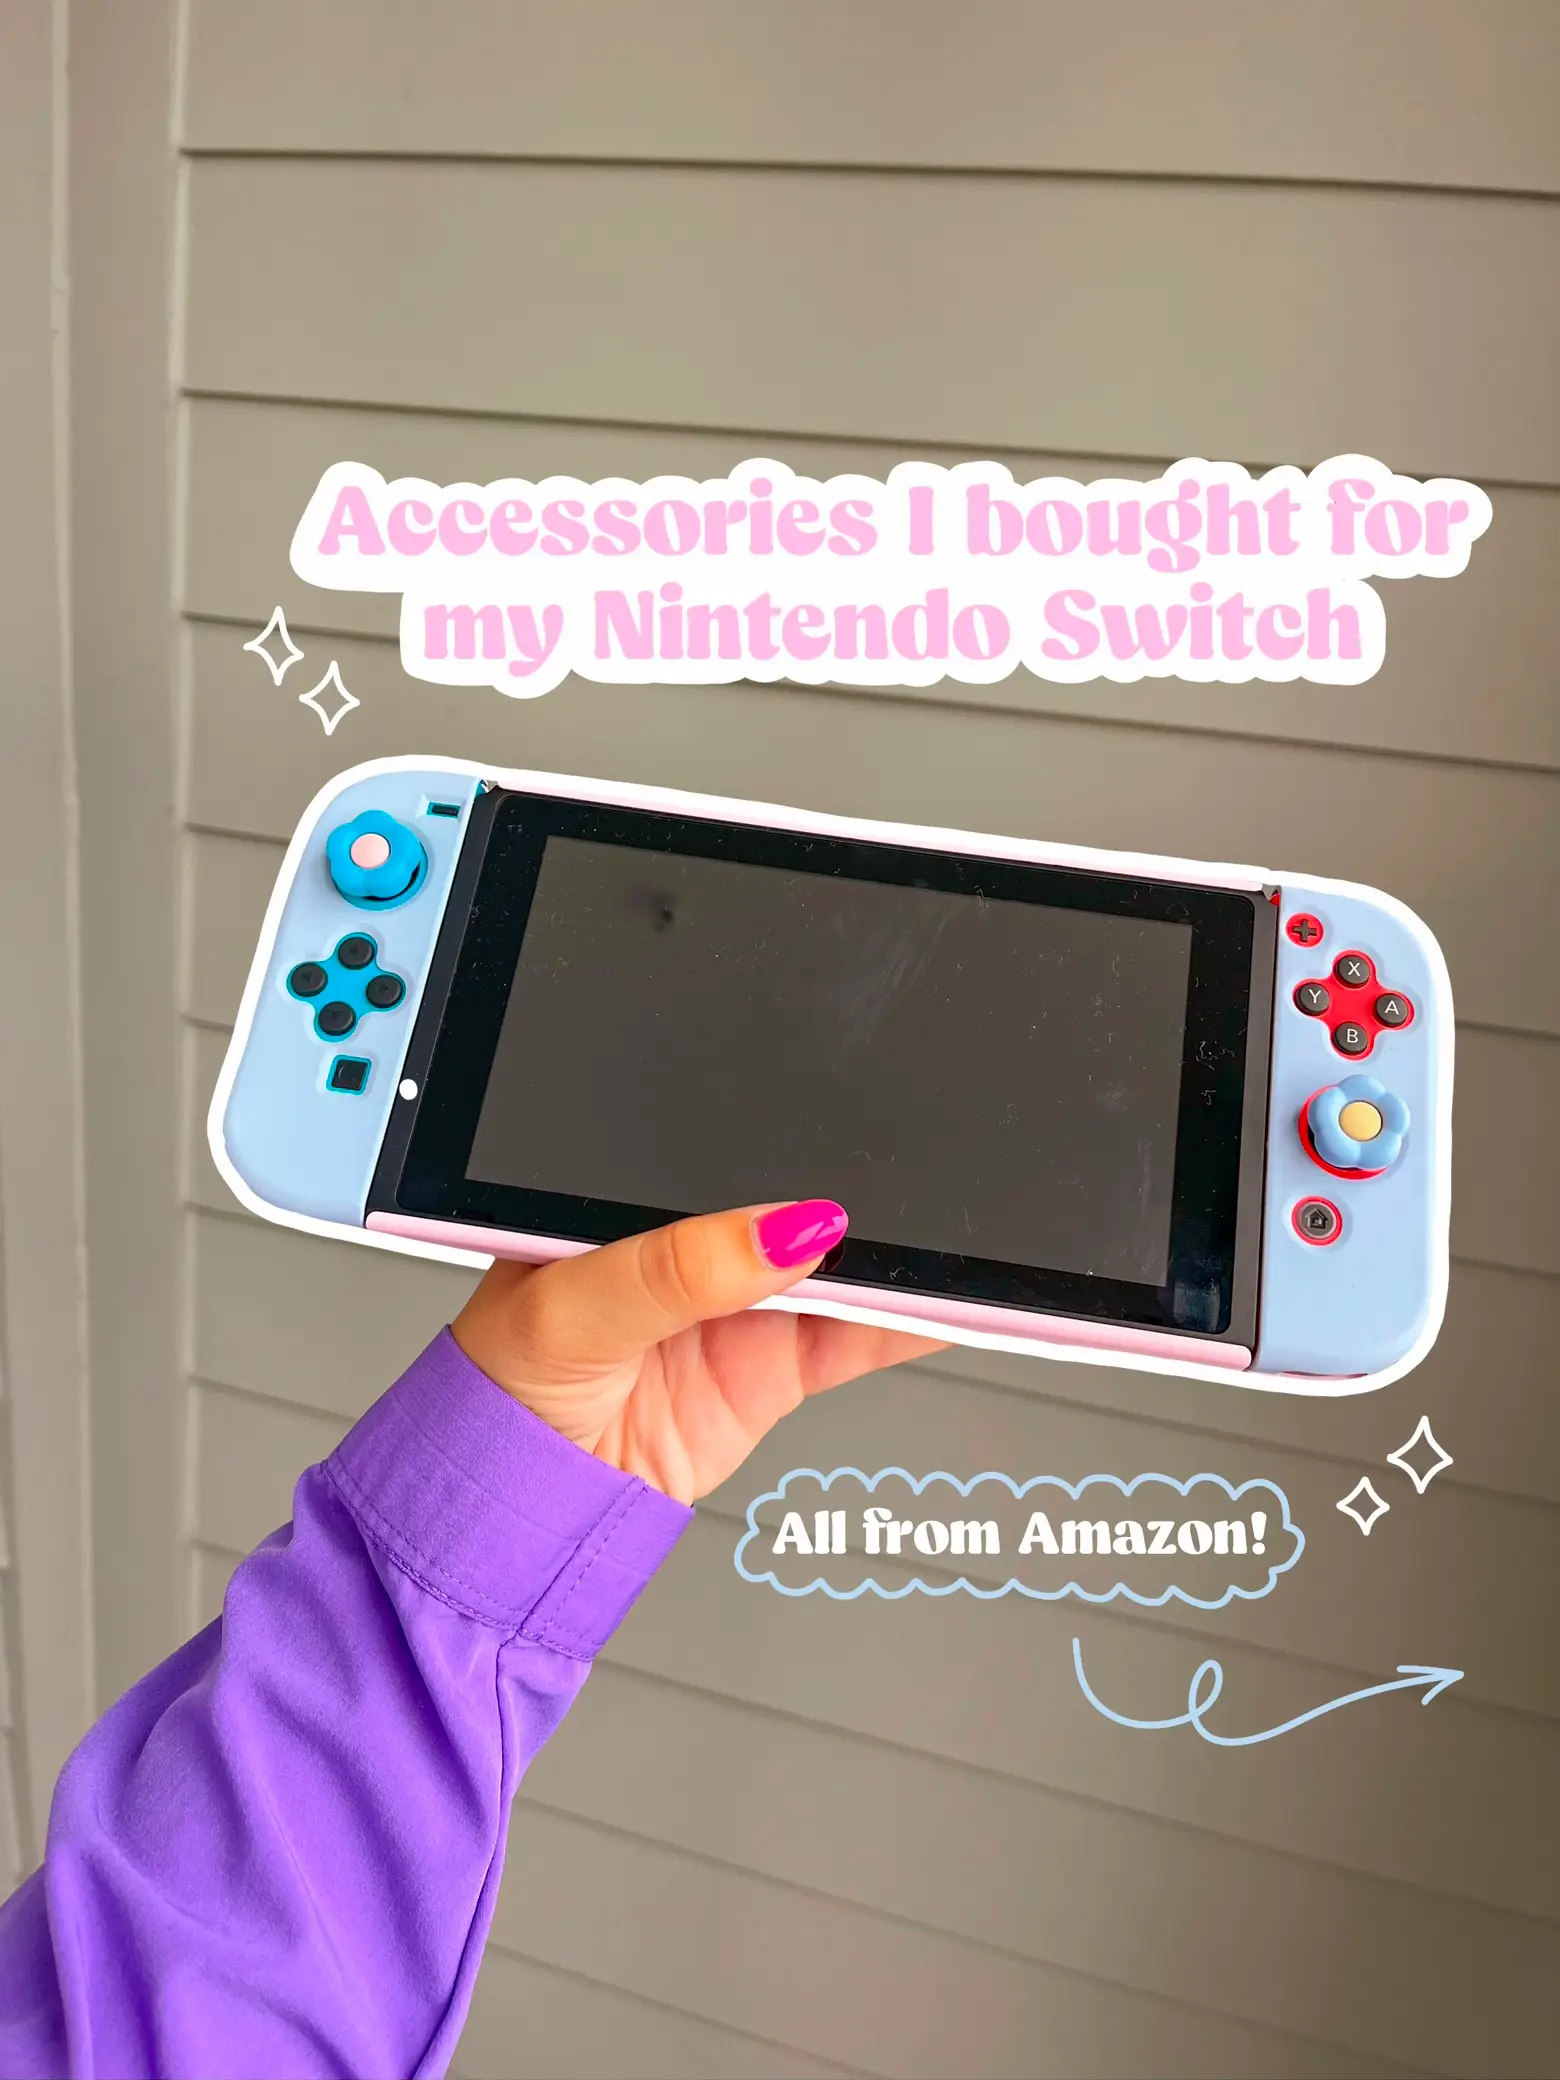 New Switch girly! Drop game recs! 🎮👩🏽‍💻 | Gallery posted by